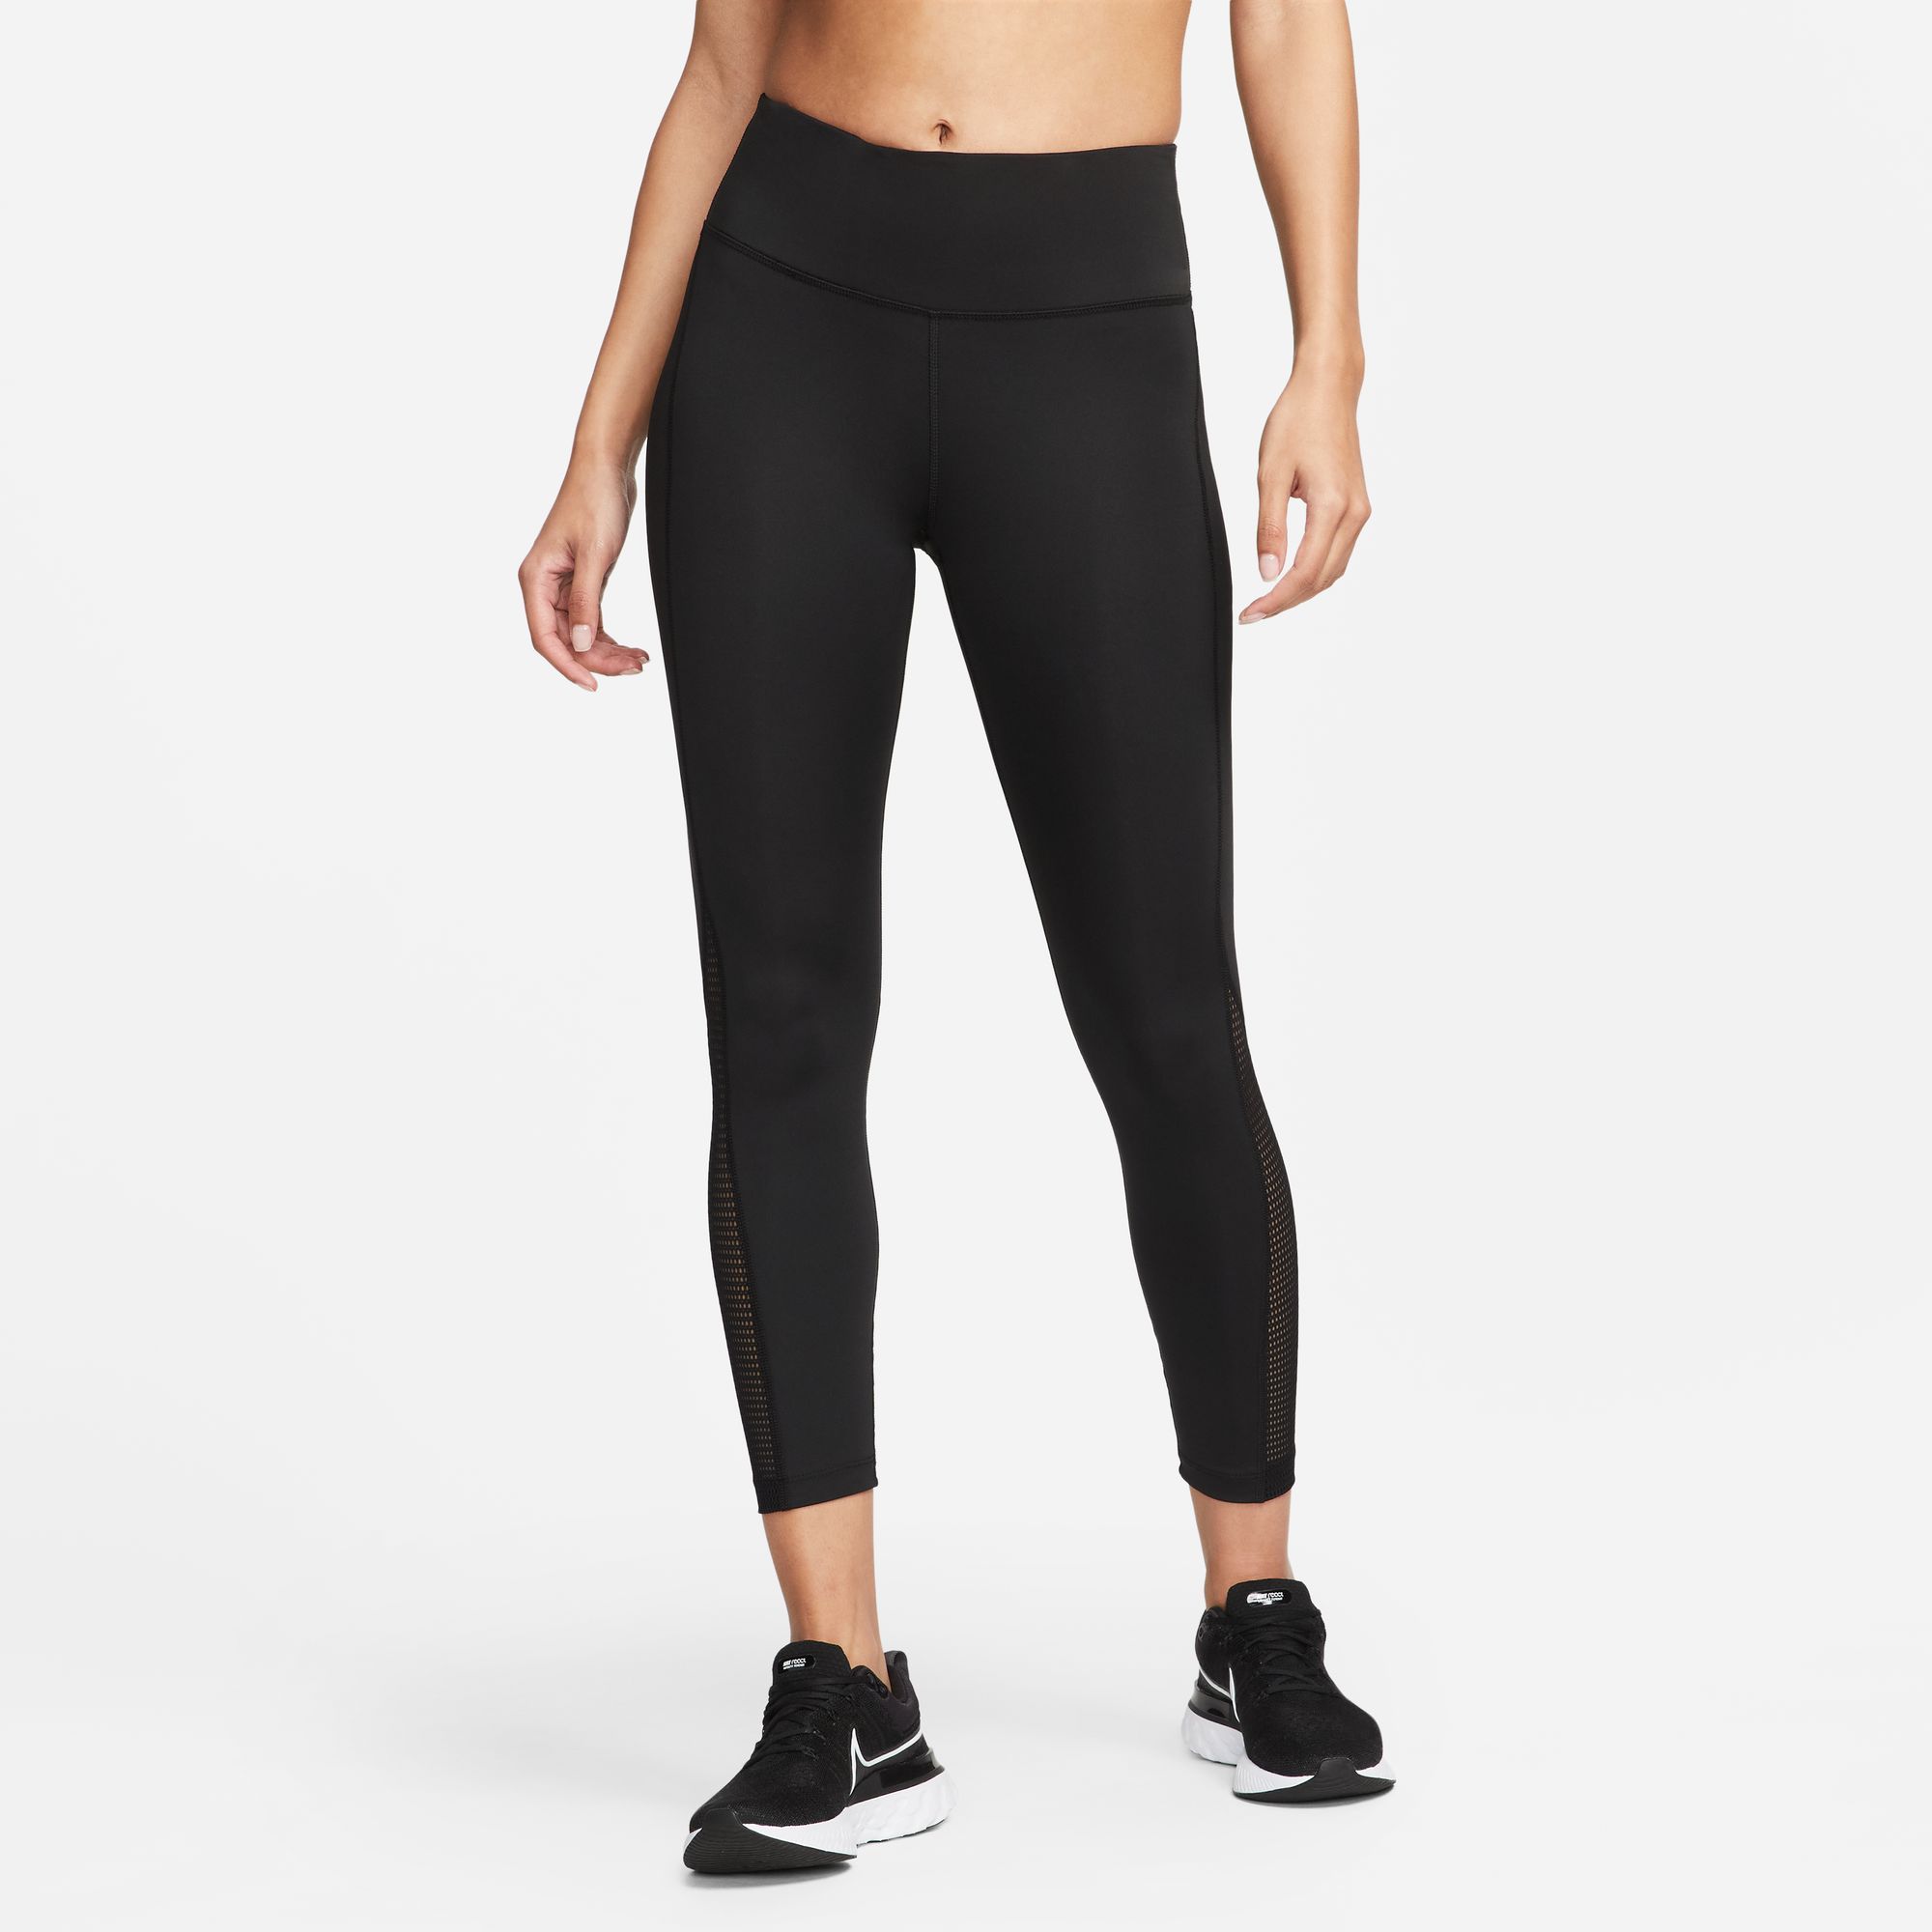 LICRA NIKE MUJER FAST CROP CAFE  Linio Colombia - NI235SP0S04VXLCO